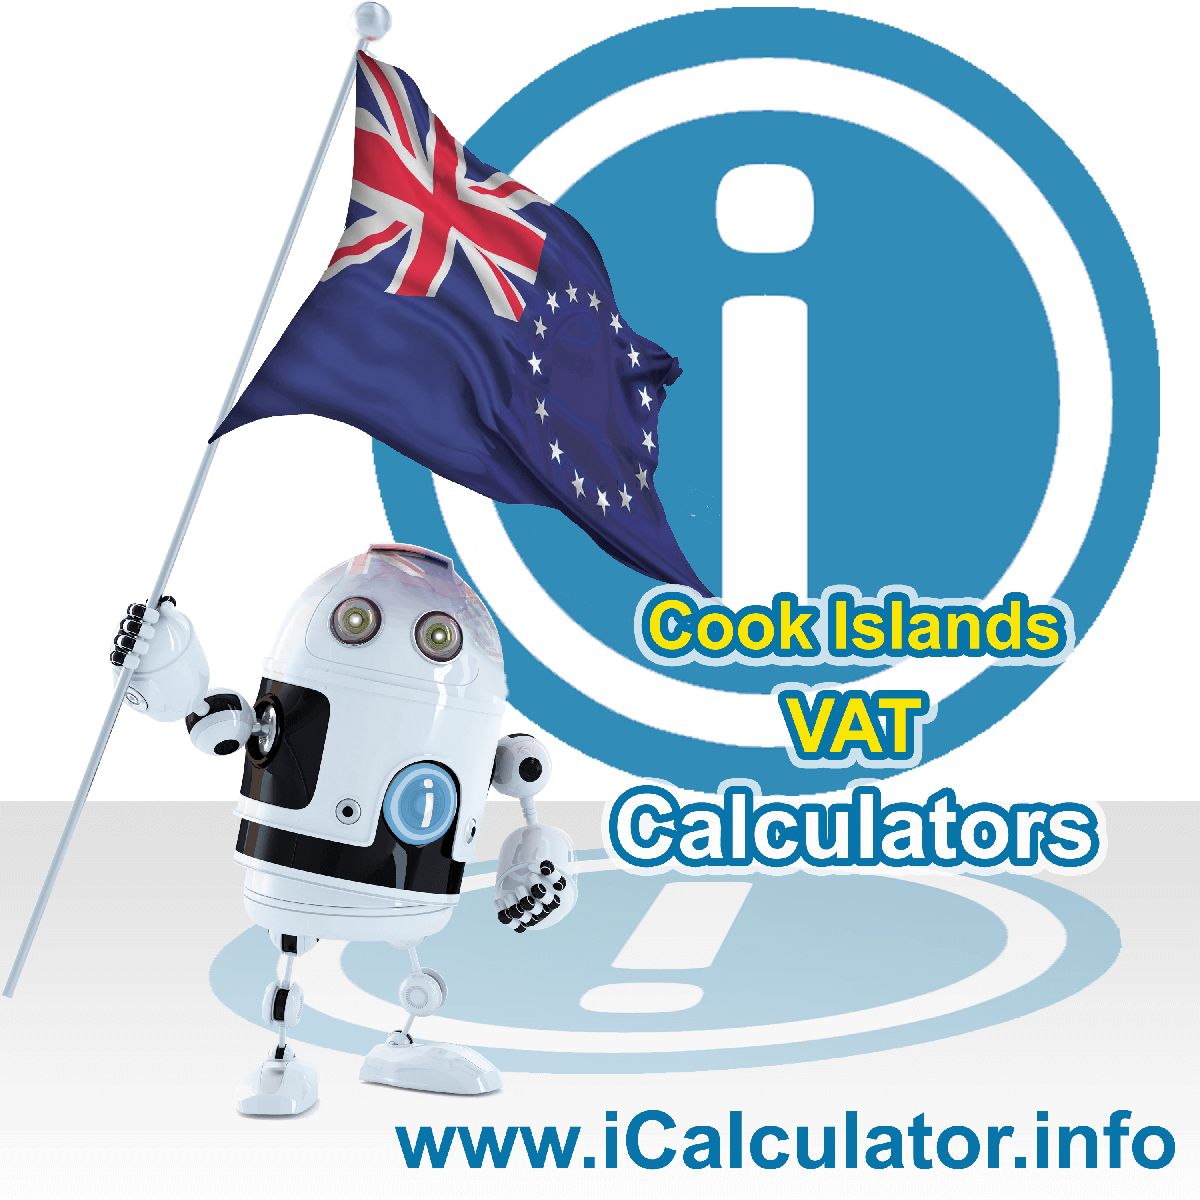 Cook Islands VAT Calculator. This image shows the Cook Islands flag and information relating to the VAT formula used for calculating Value Added Tax in Cook Islands using the Cook Islands VAT Calculator in 2022